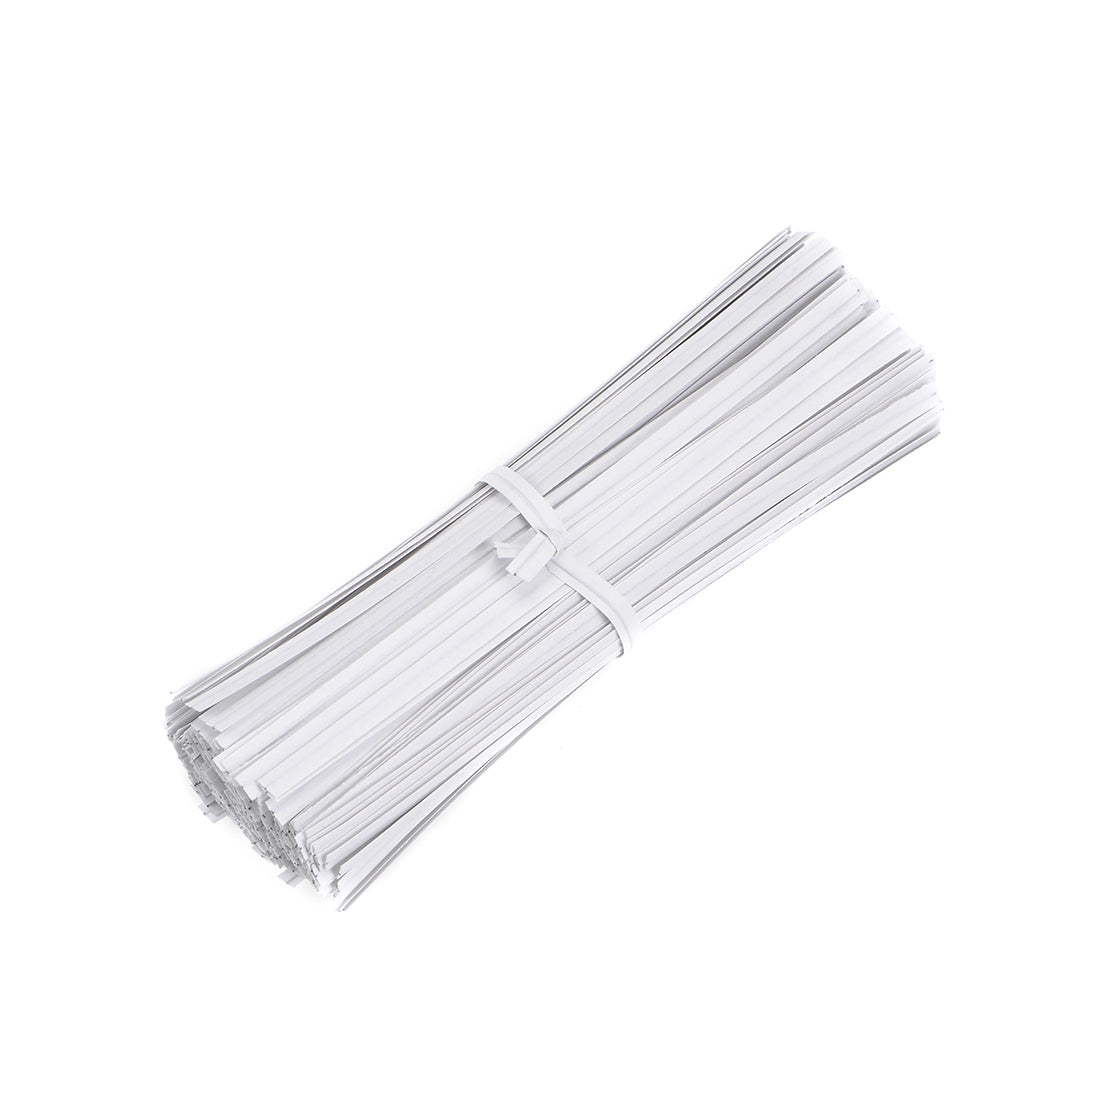 uxcell Uxcell Long Strong Twist Ties 4 Inches Quality  Closure Tie for Tying Gift Bags Art Craft Ties Manage Cords White 1000pcs